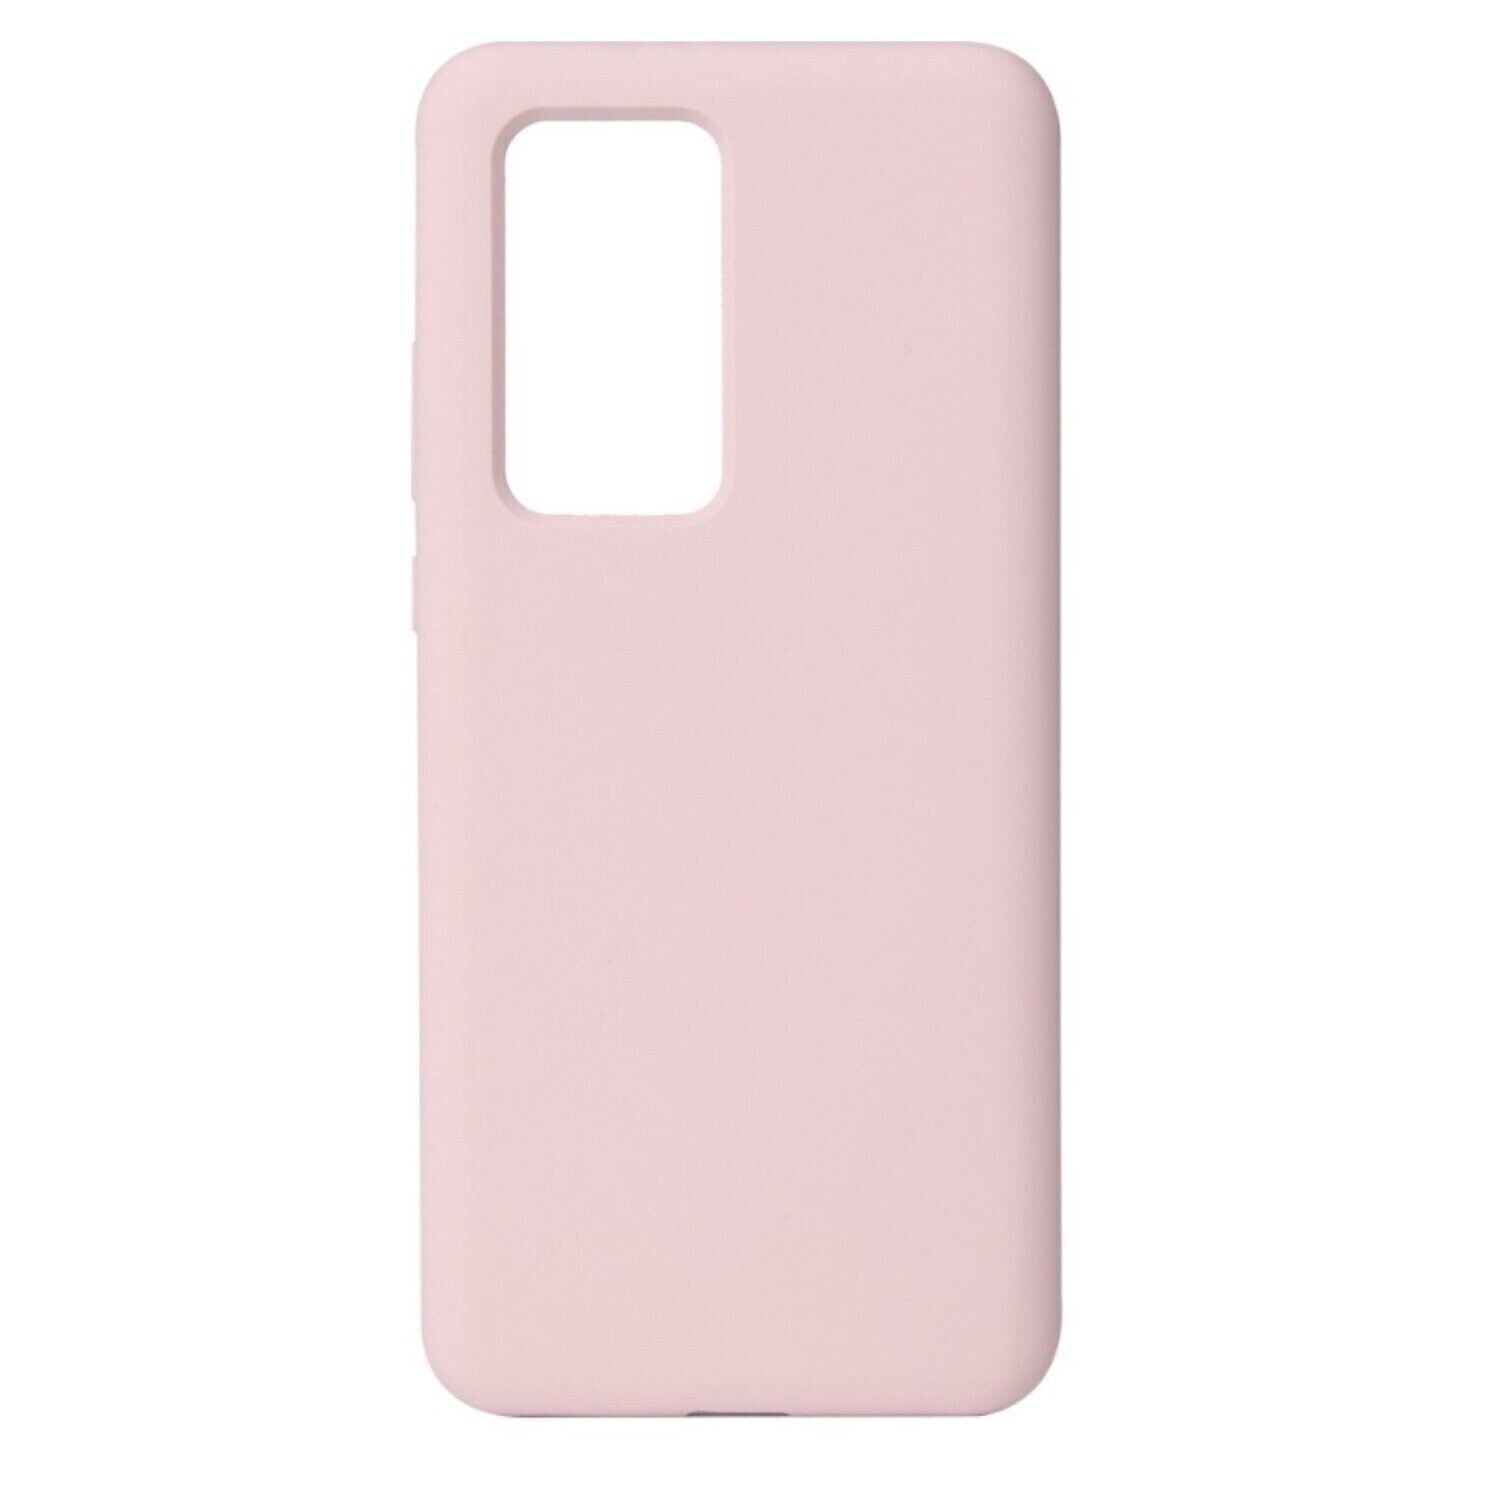 Komass Huawei P40 Pro Liquid Silicone Back Cover, Pink